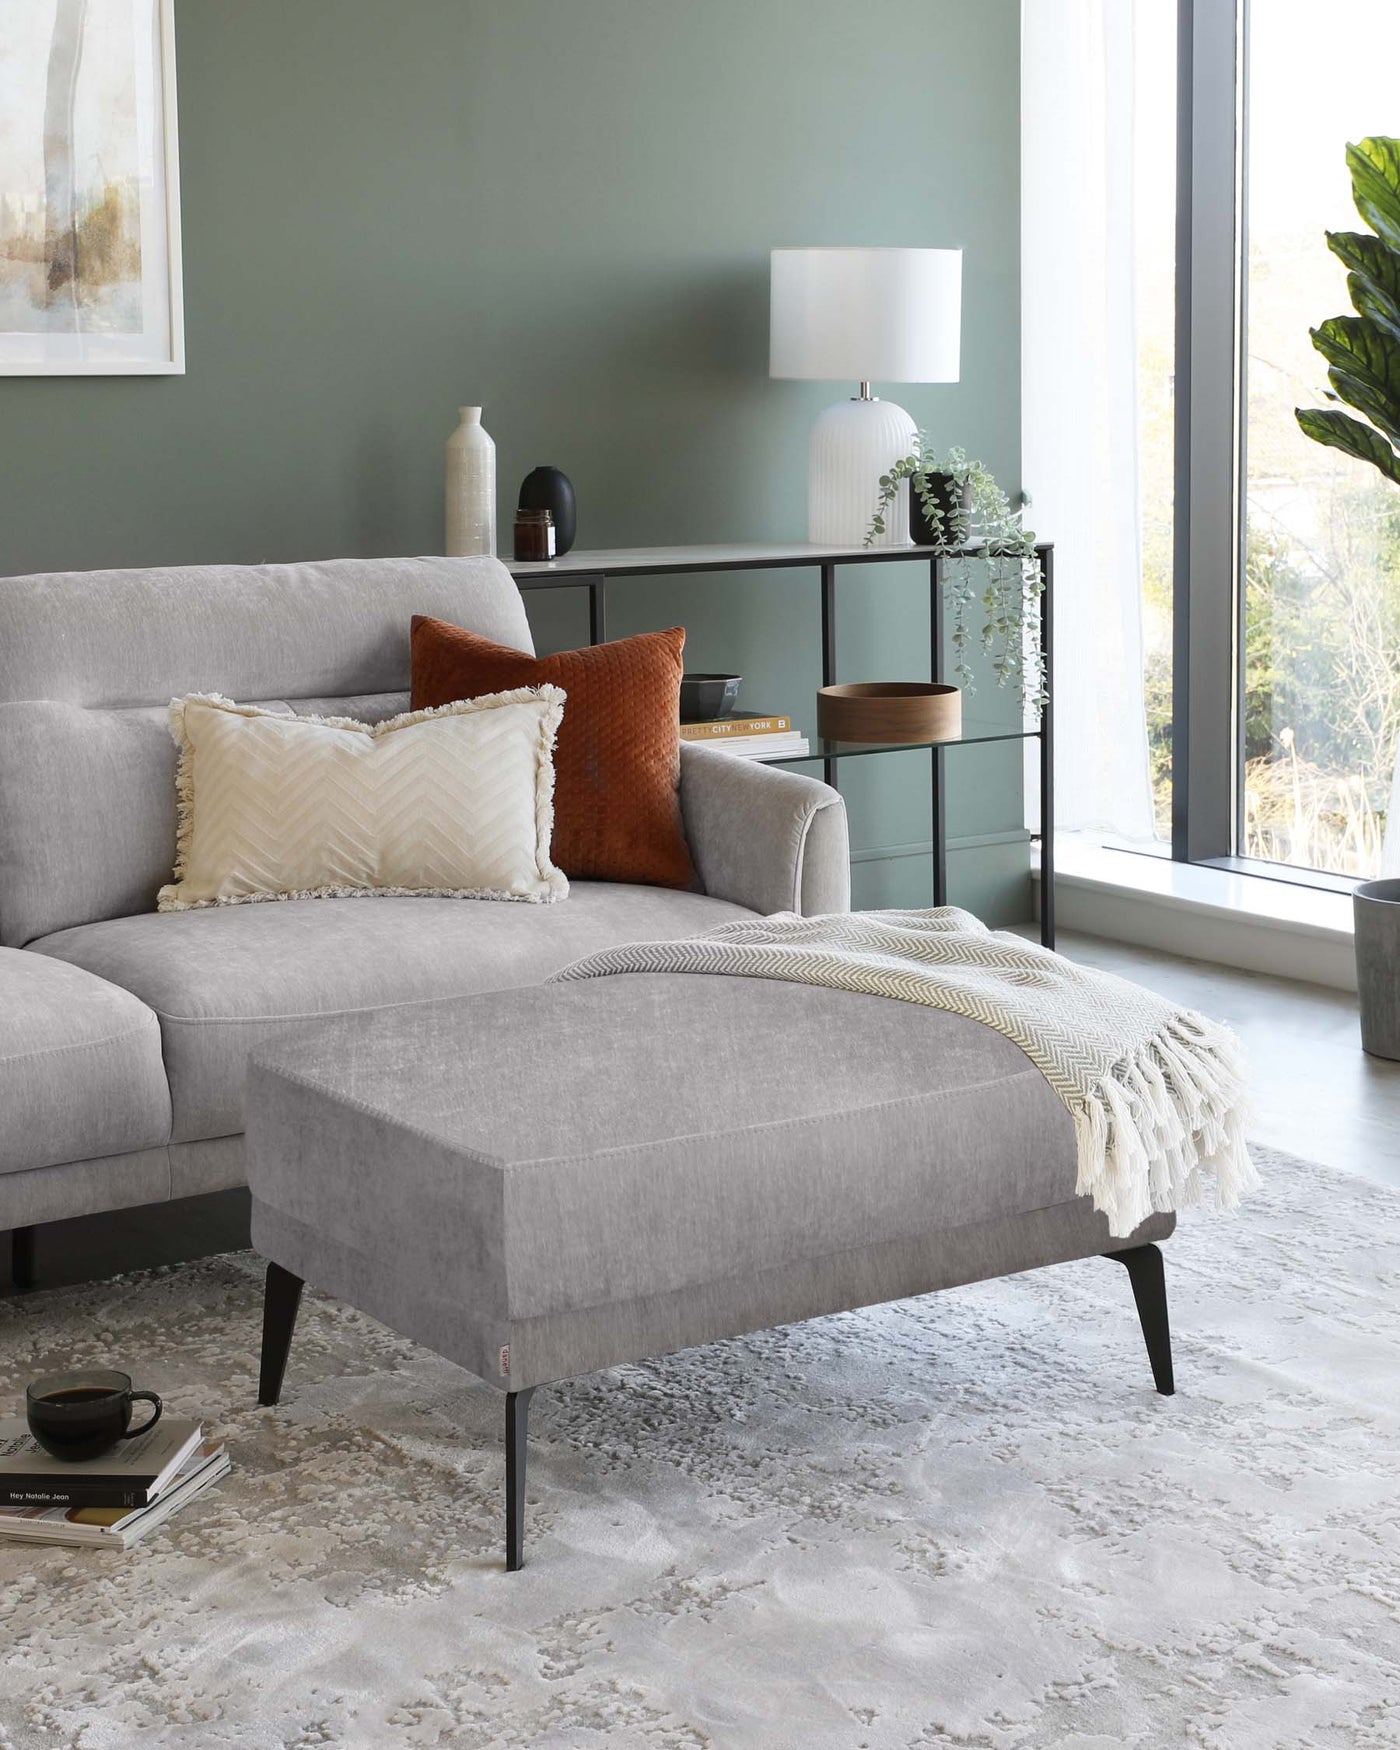 Modern grey fabric sofa with plush cushions and a coordinating grey fabric ottoman featuring dark tapered legs. A sleek black metal and wood shelving unit with decorative items is visible in the background. The furniture arrangement is on a textured off-white area rug, contributing to a contemporary and comfortable living space aesthetic.